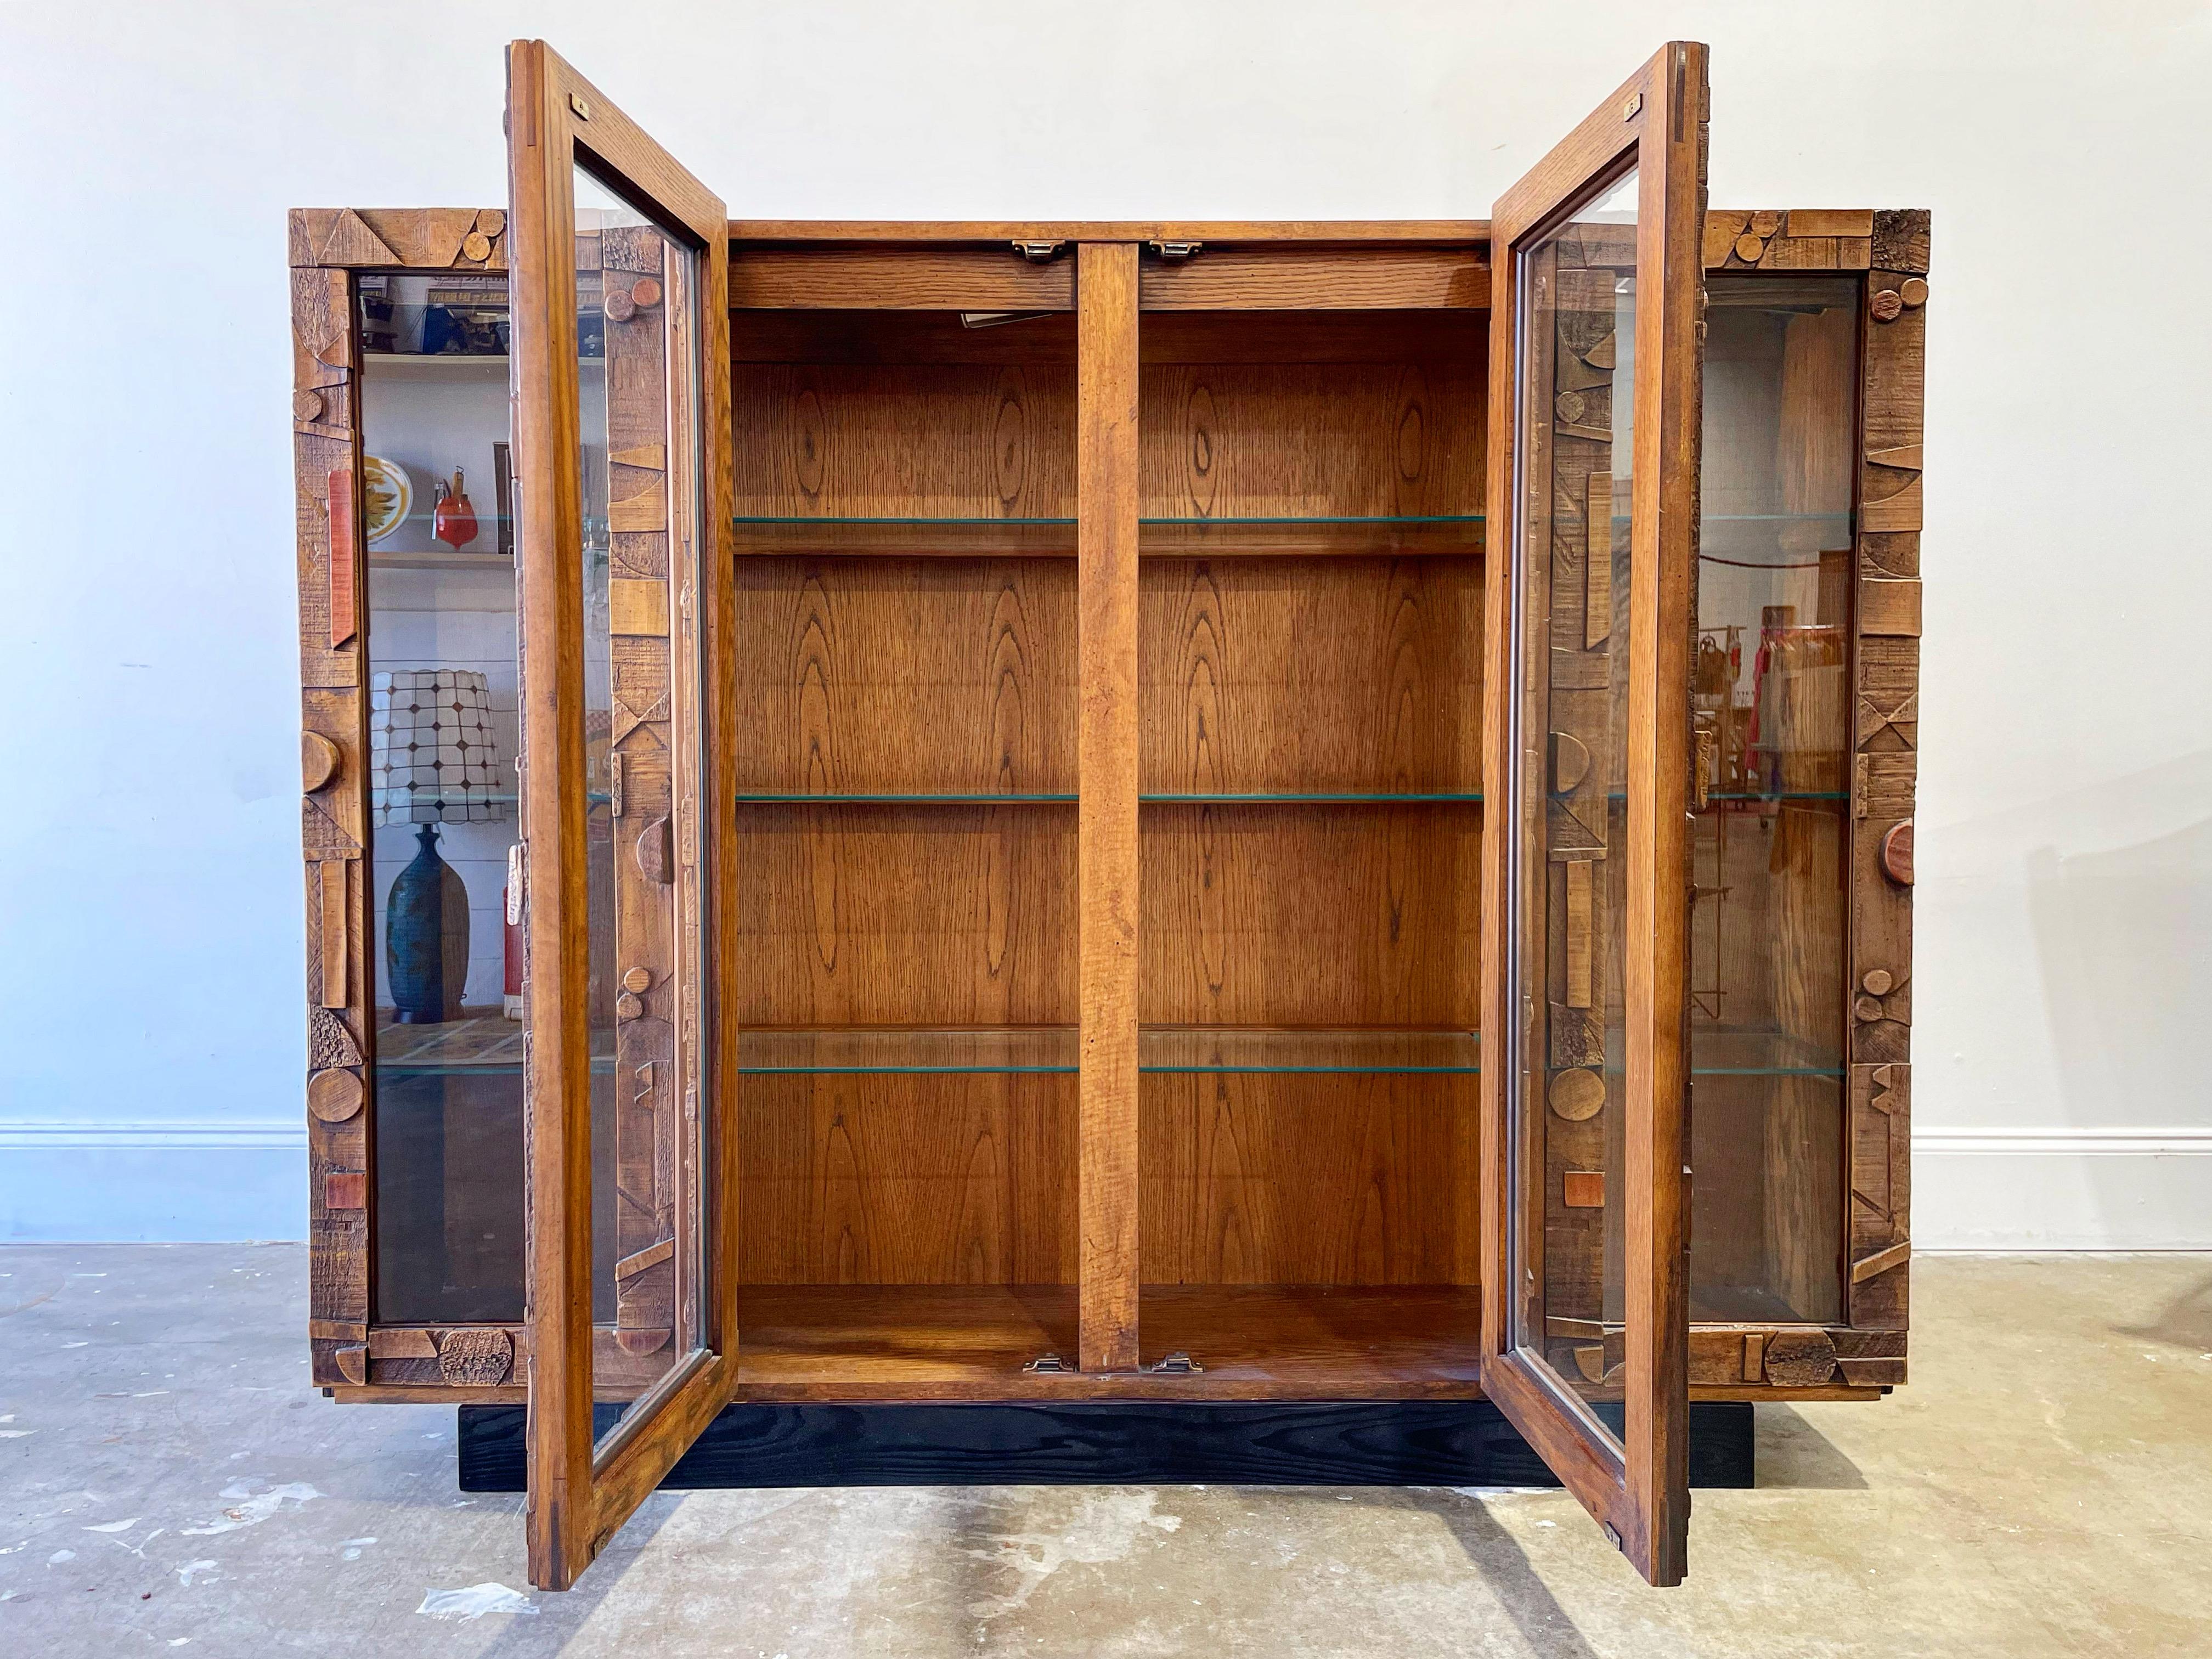 Brutalist style vintage curio display cabinet by Lane. Walnut, resin and glass on an ebonized cypress plinth base. Modern abstract cubist design on the door facades. Glass shelves with interior lighting. Cabinet shows minor signs of use - it is